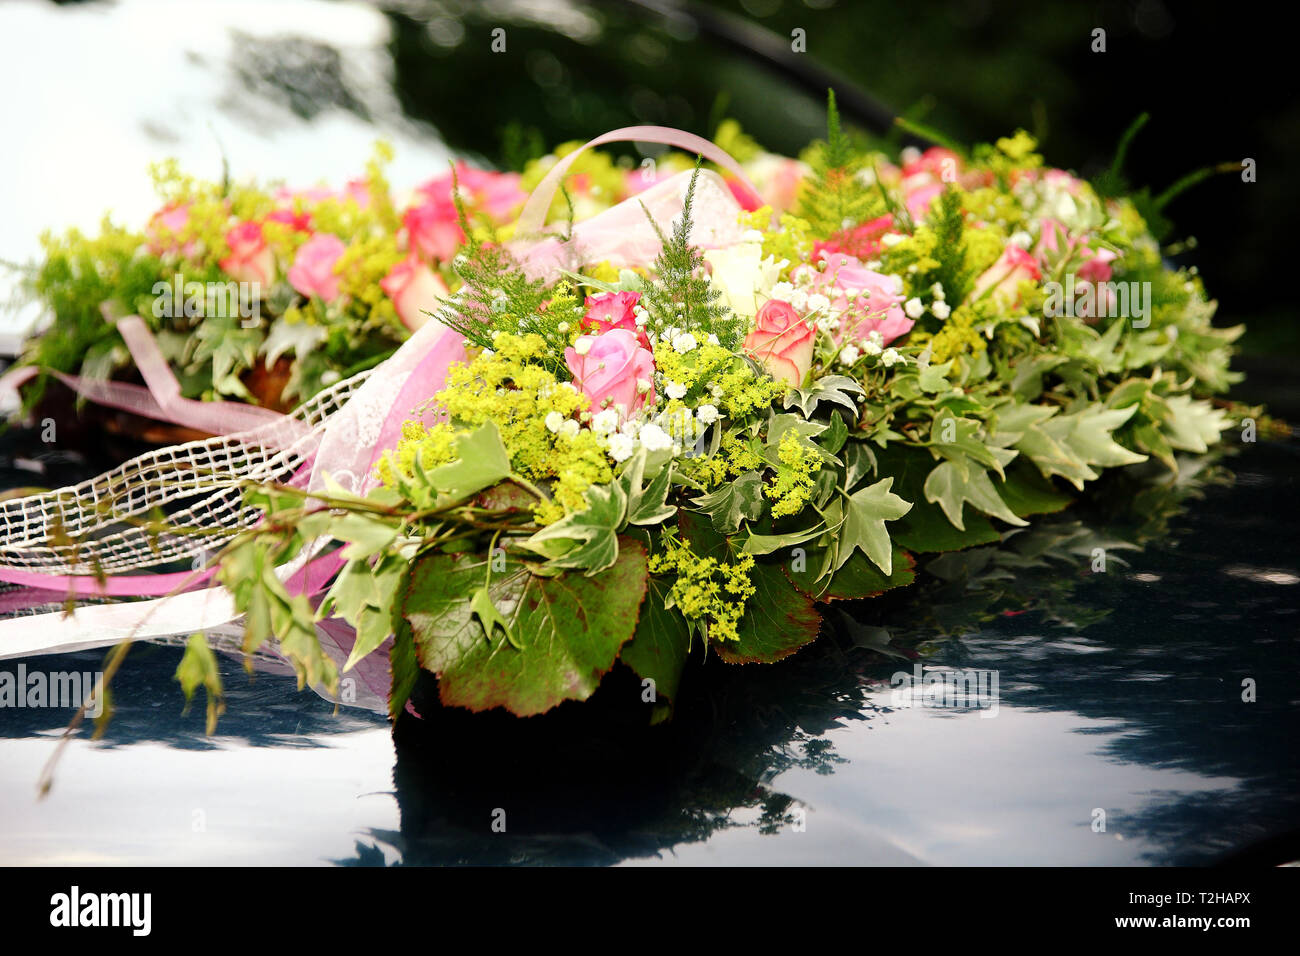 A flower bouquet for the wedding on the hood of a car. Stock Photo